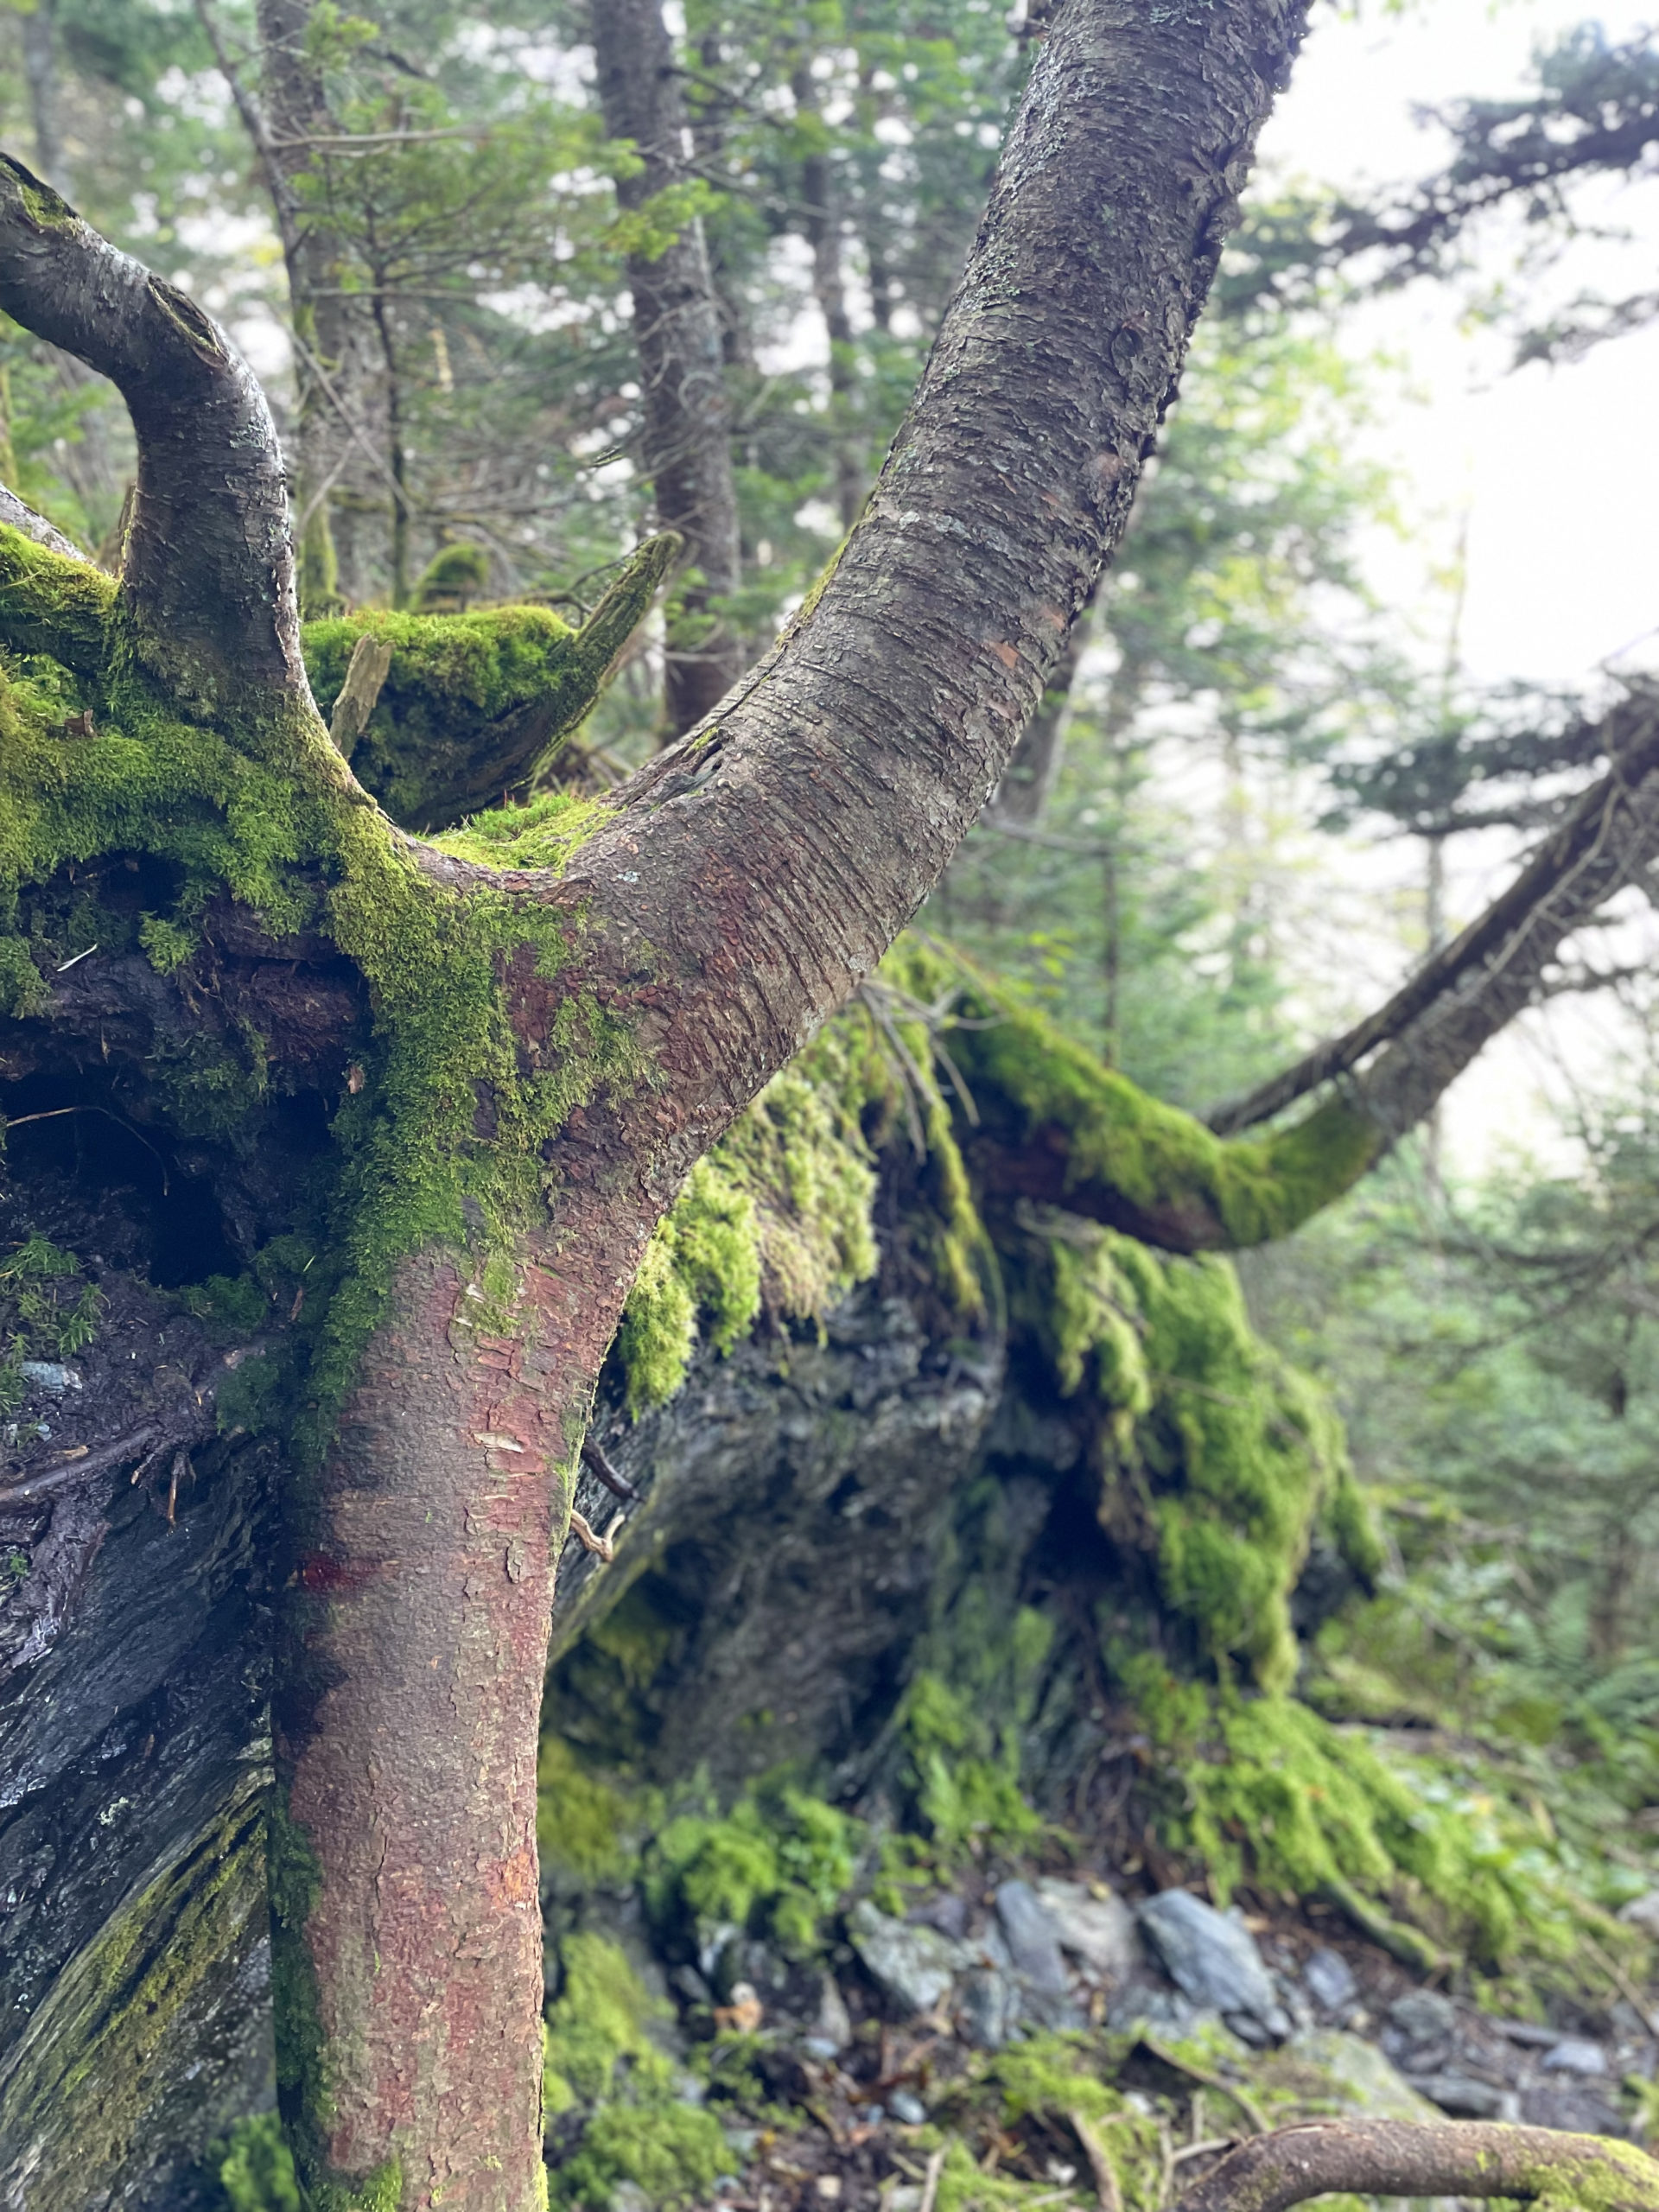 Roots growing over rocks, seen while hiking Mt. Mansfield in the Green Mountains, Vermont